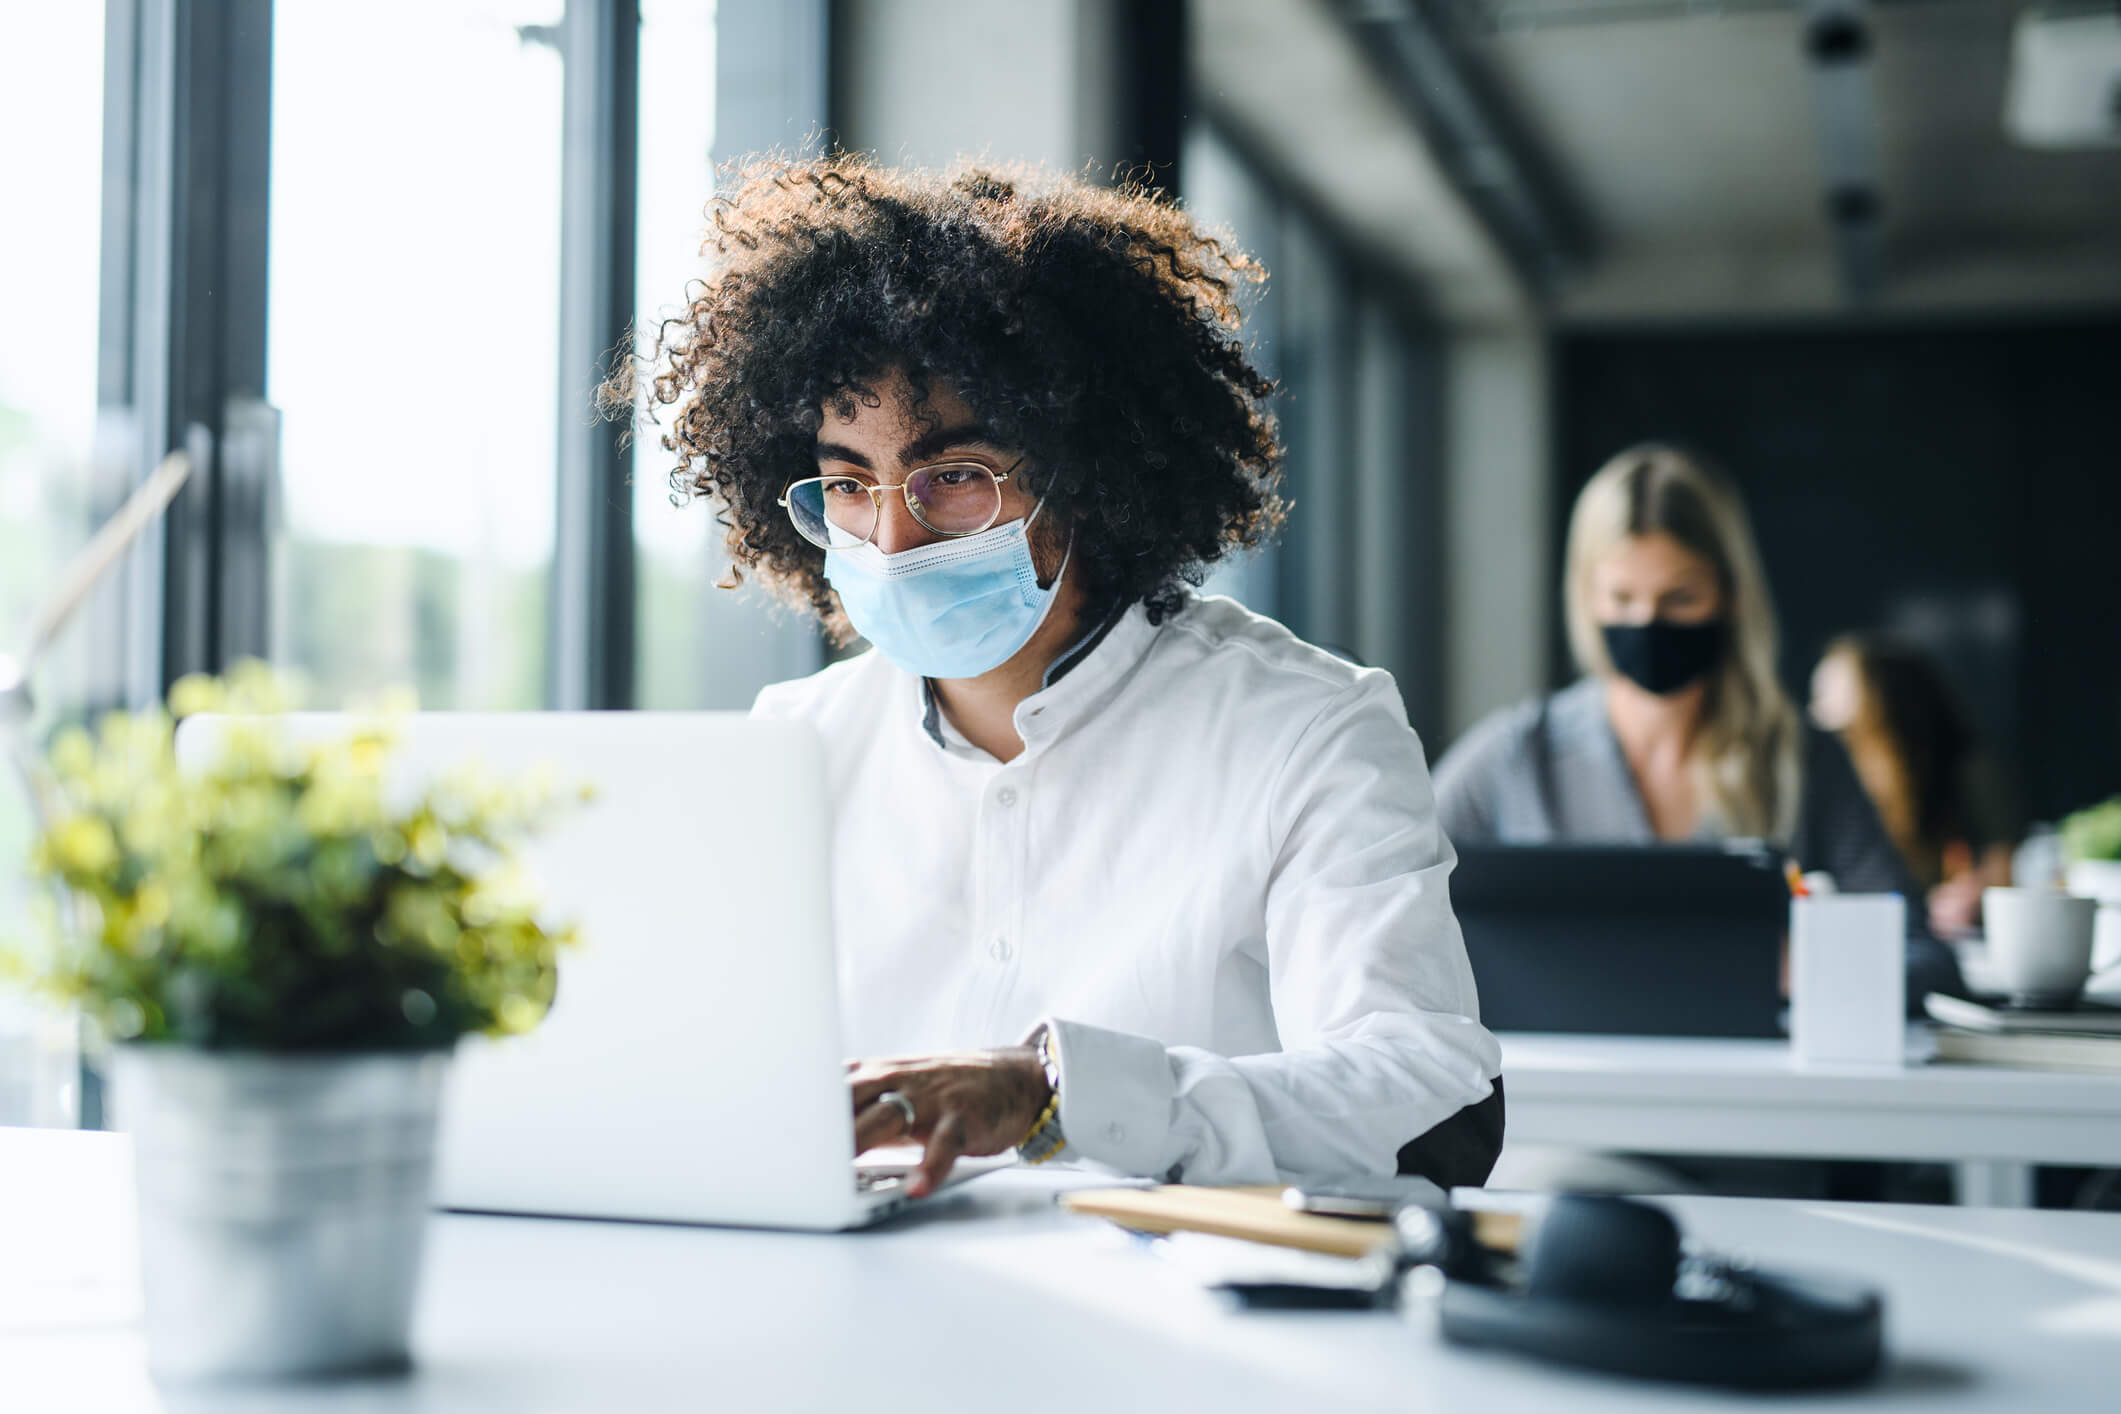 Wear a Mask at Workplace